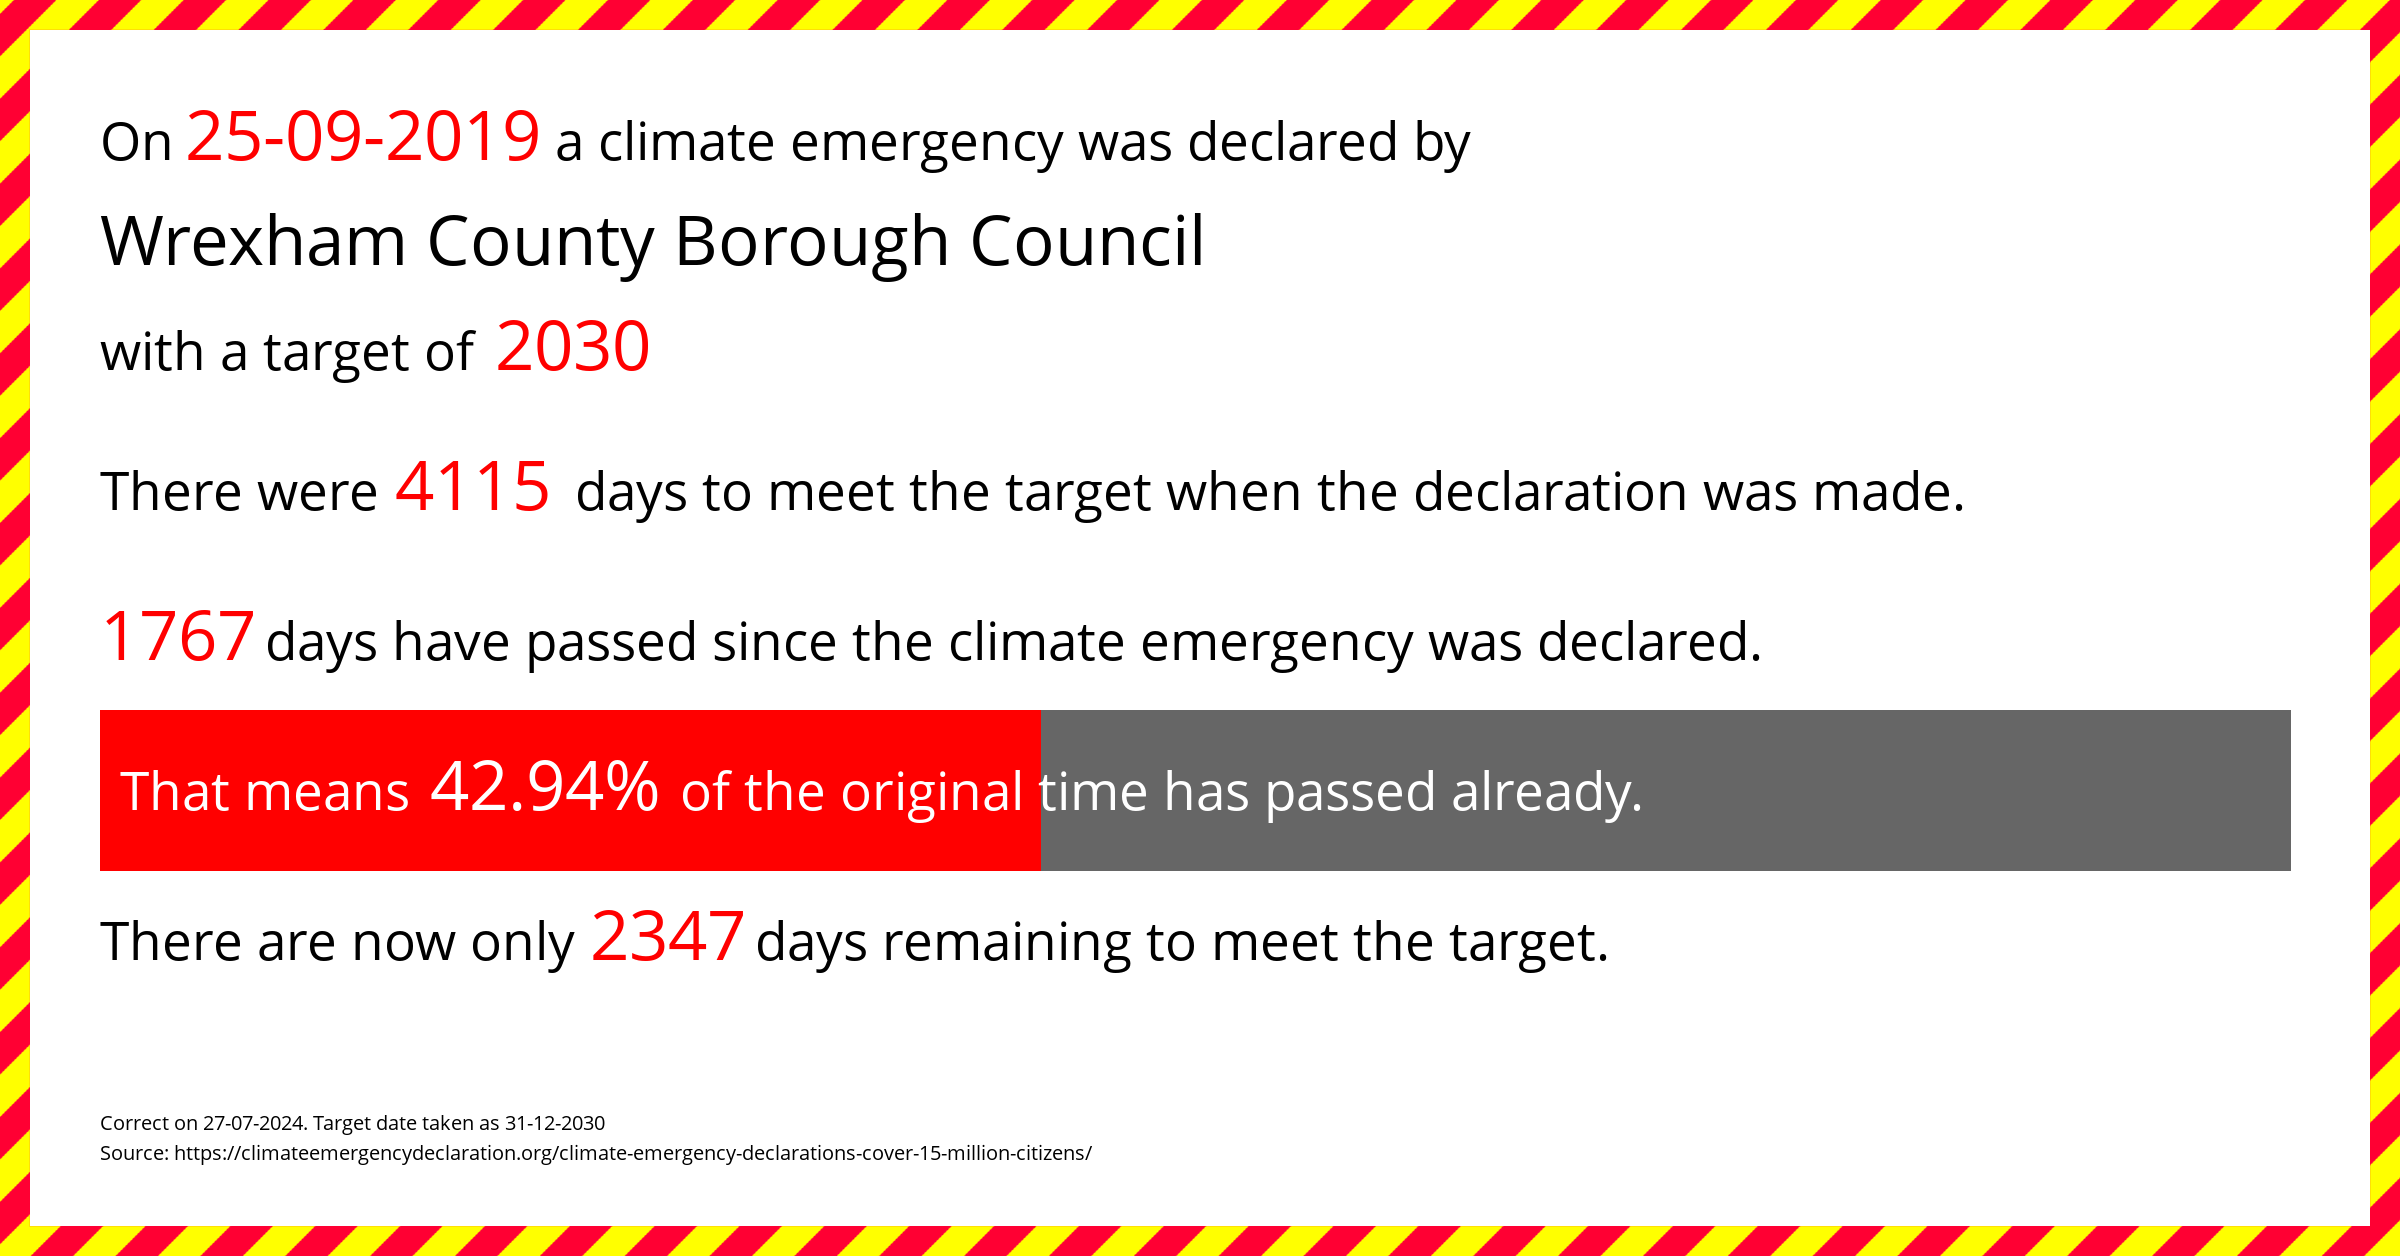 Wrexham County Borough Council declared a Climate emergency on Wednesday 25th September 2019, with a target of 2030.